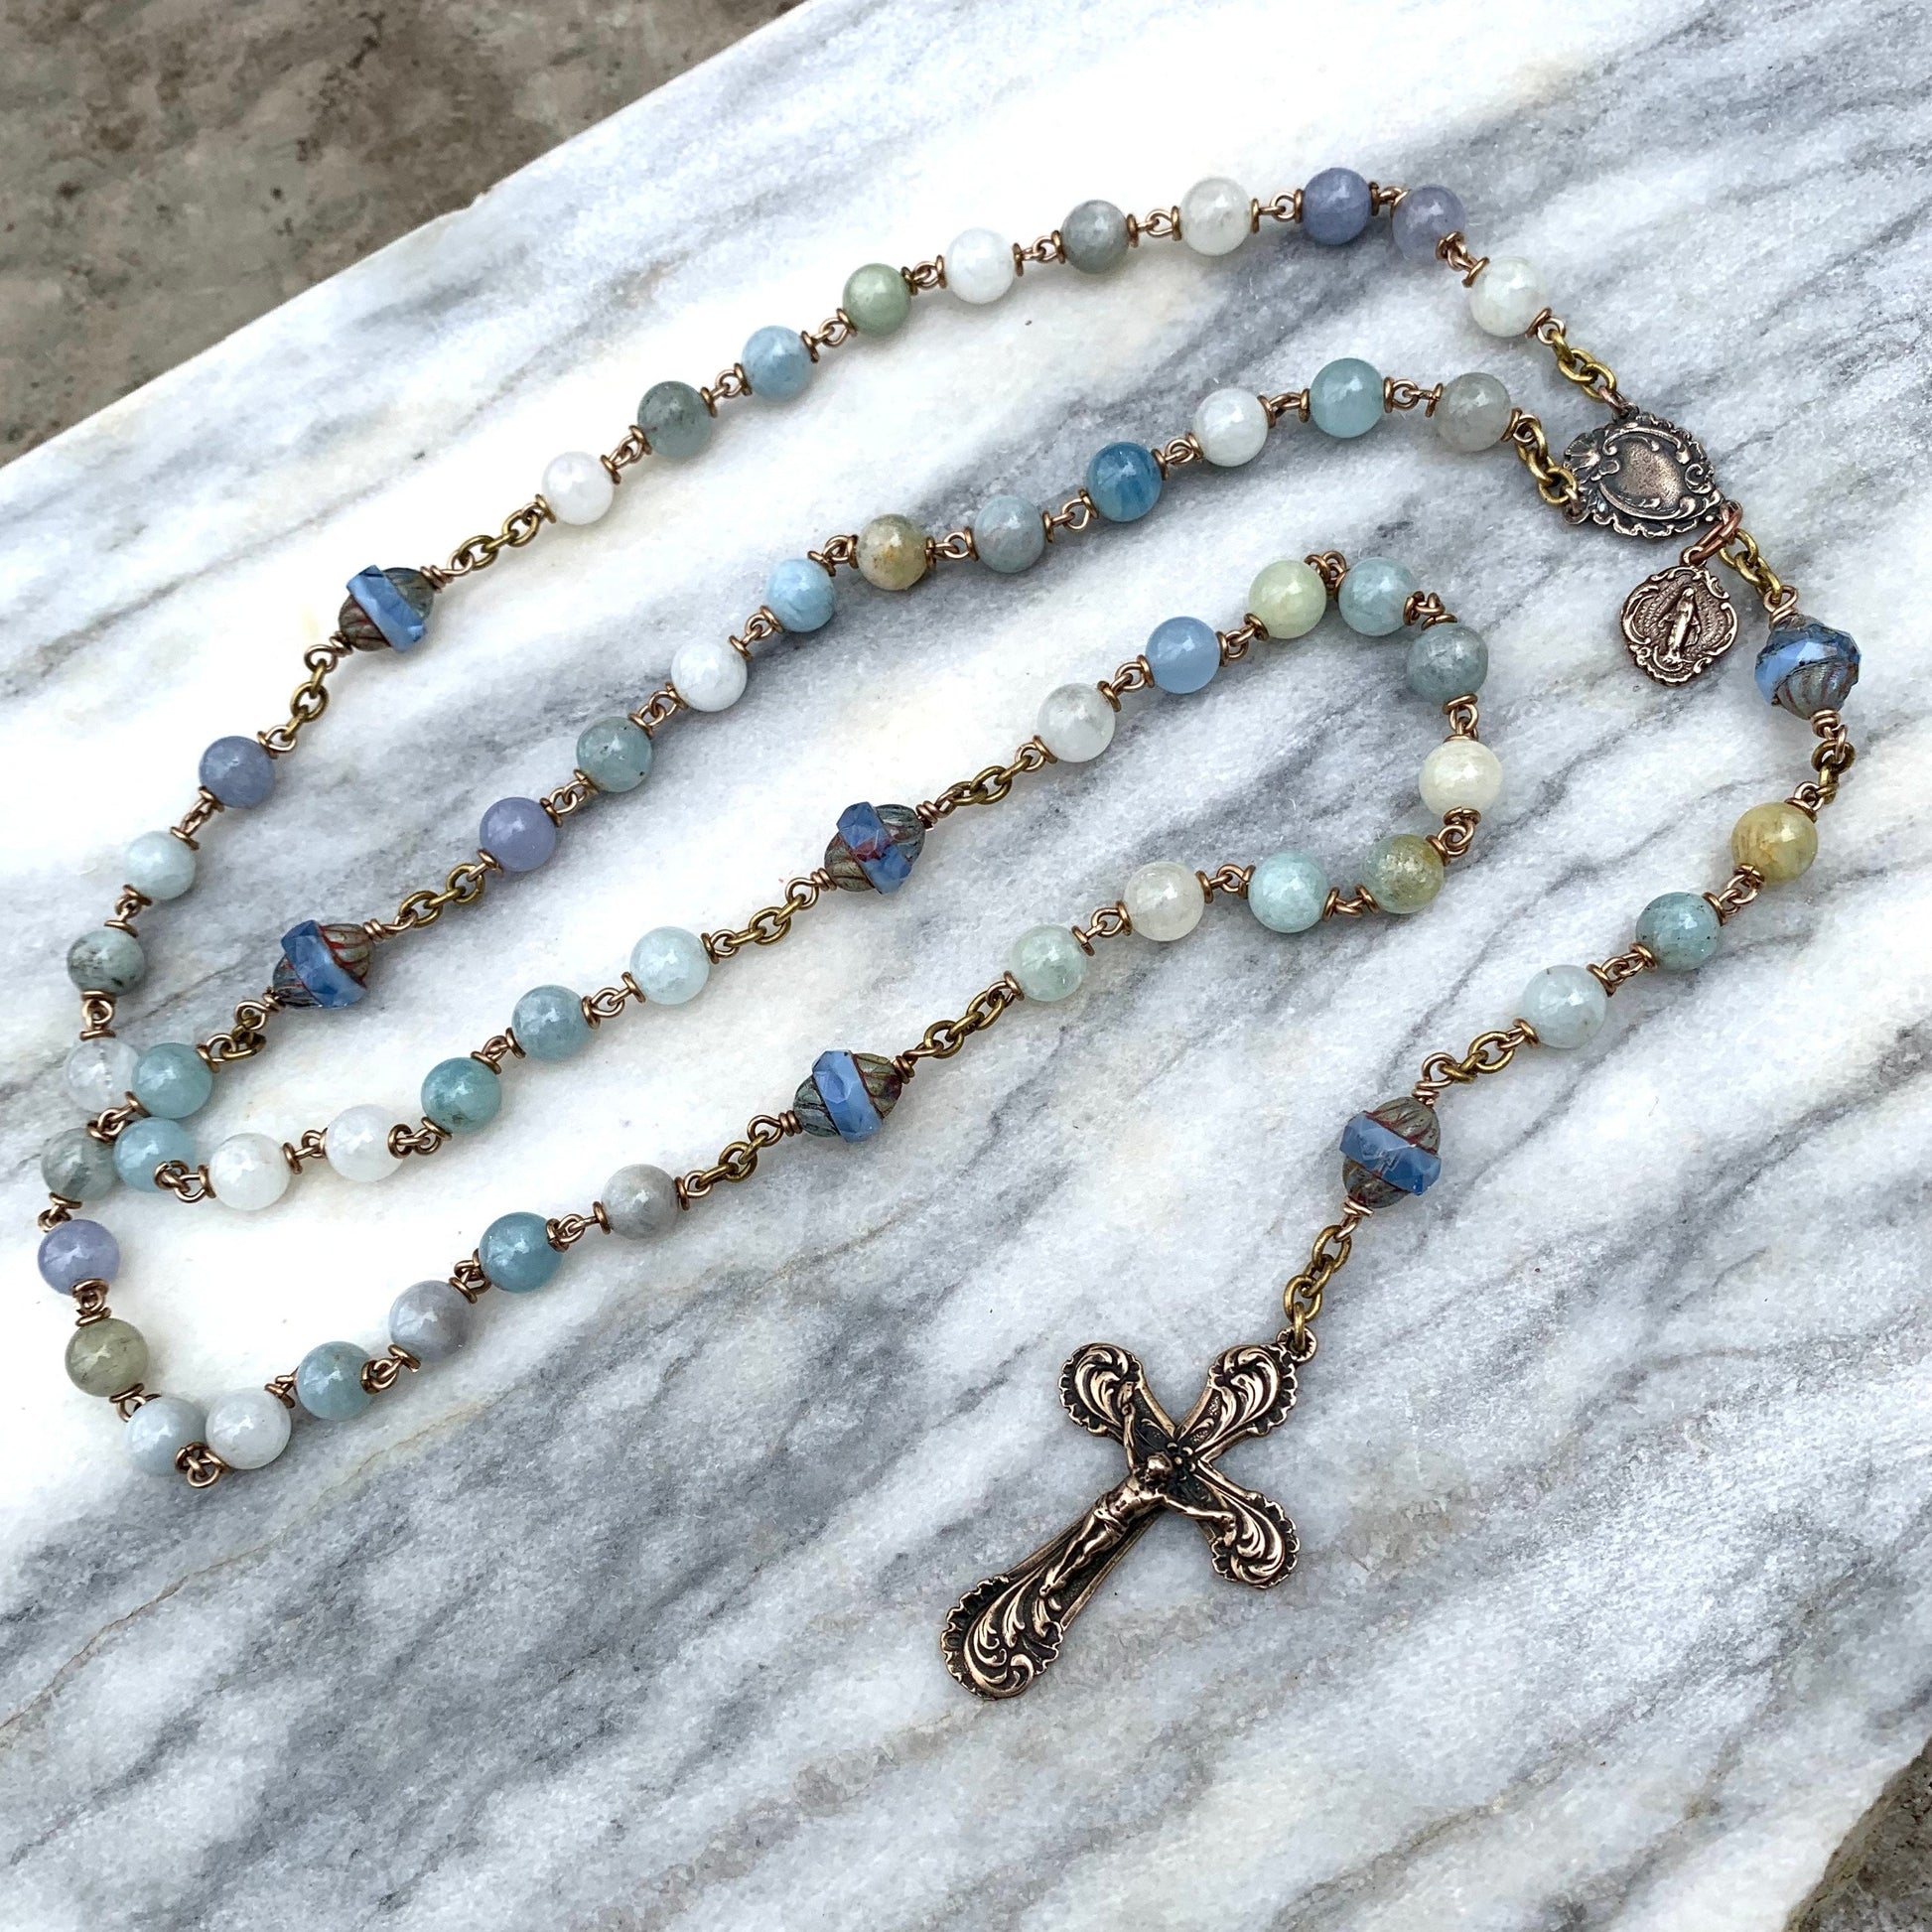 Queen of Heaven parishioners craft, donate rosaries by the thousands